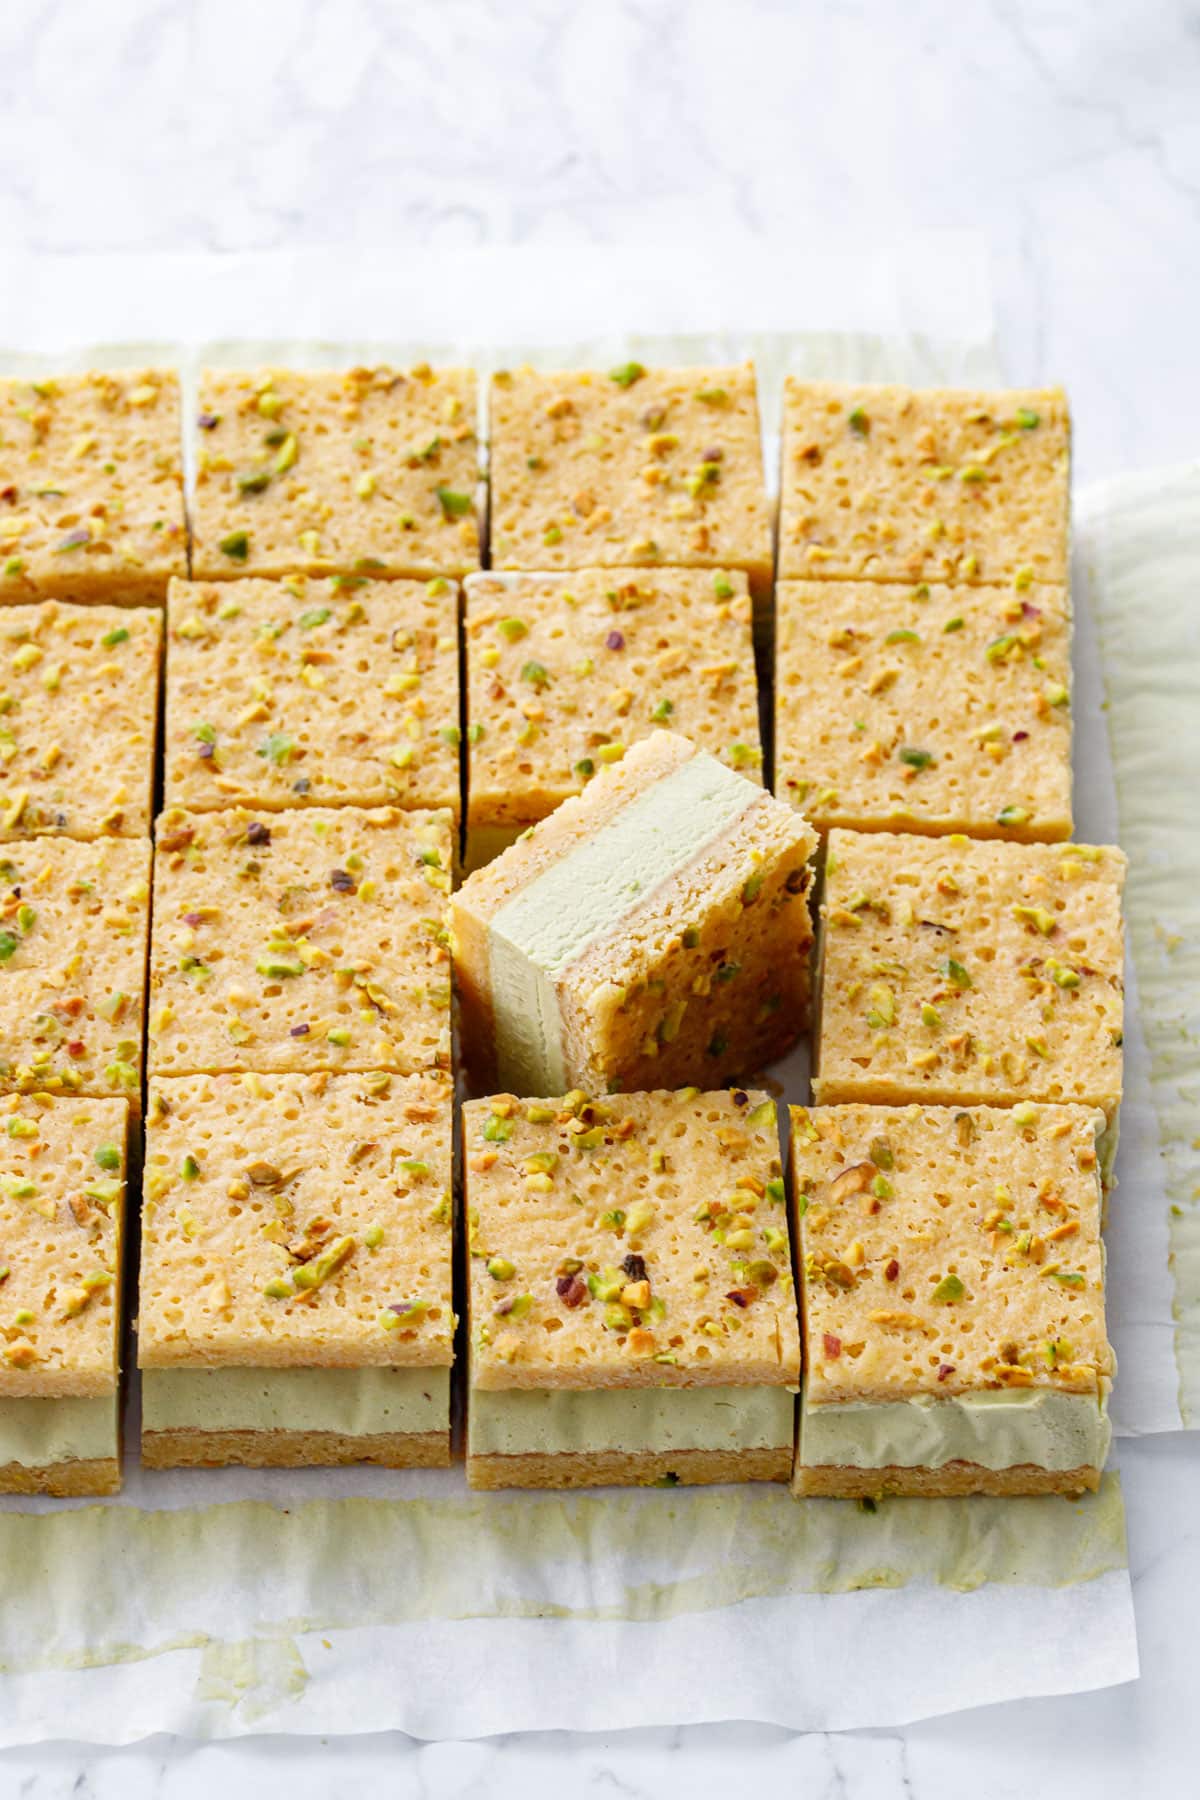 Cut squares of Pistachio Blondie Ice Cream Sandwiches on parchment paper, one square propped on its side to see the layers.